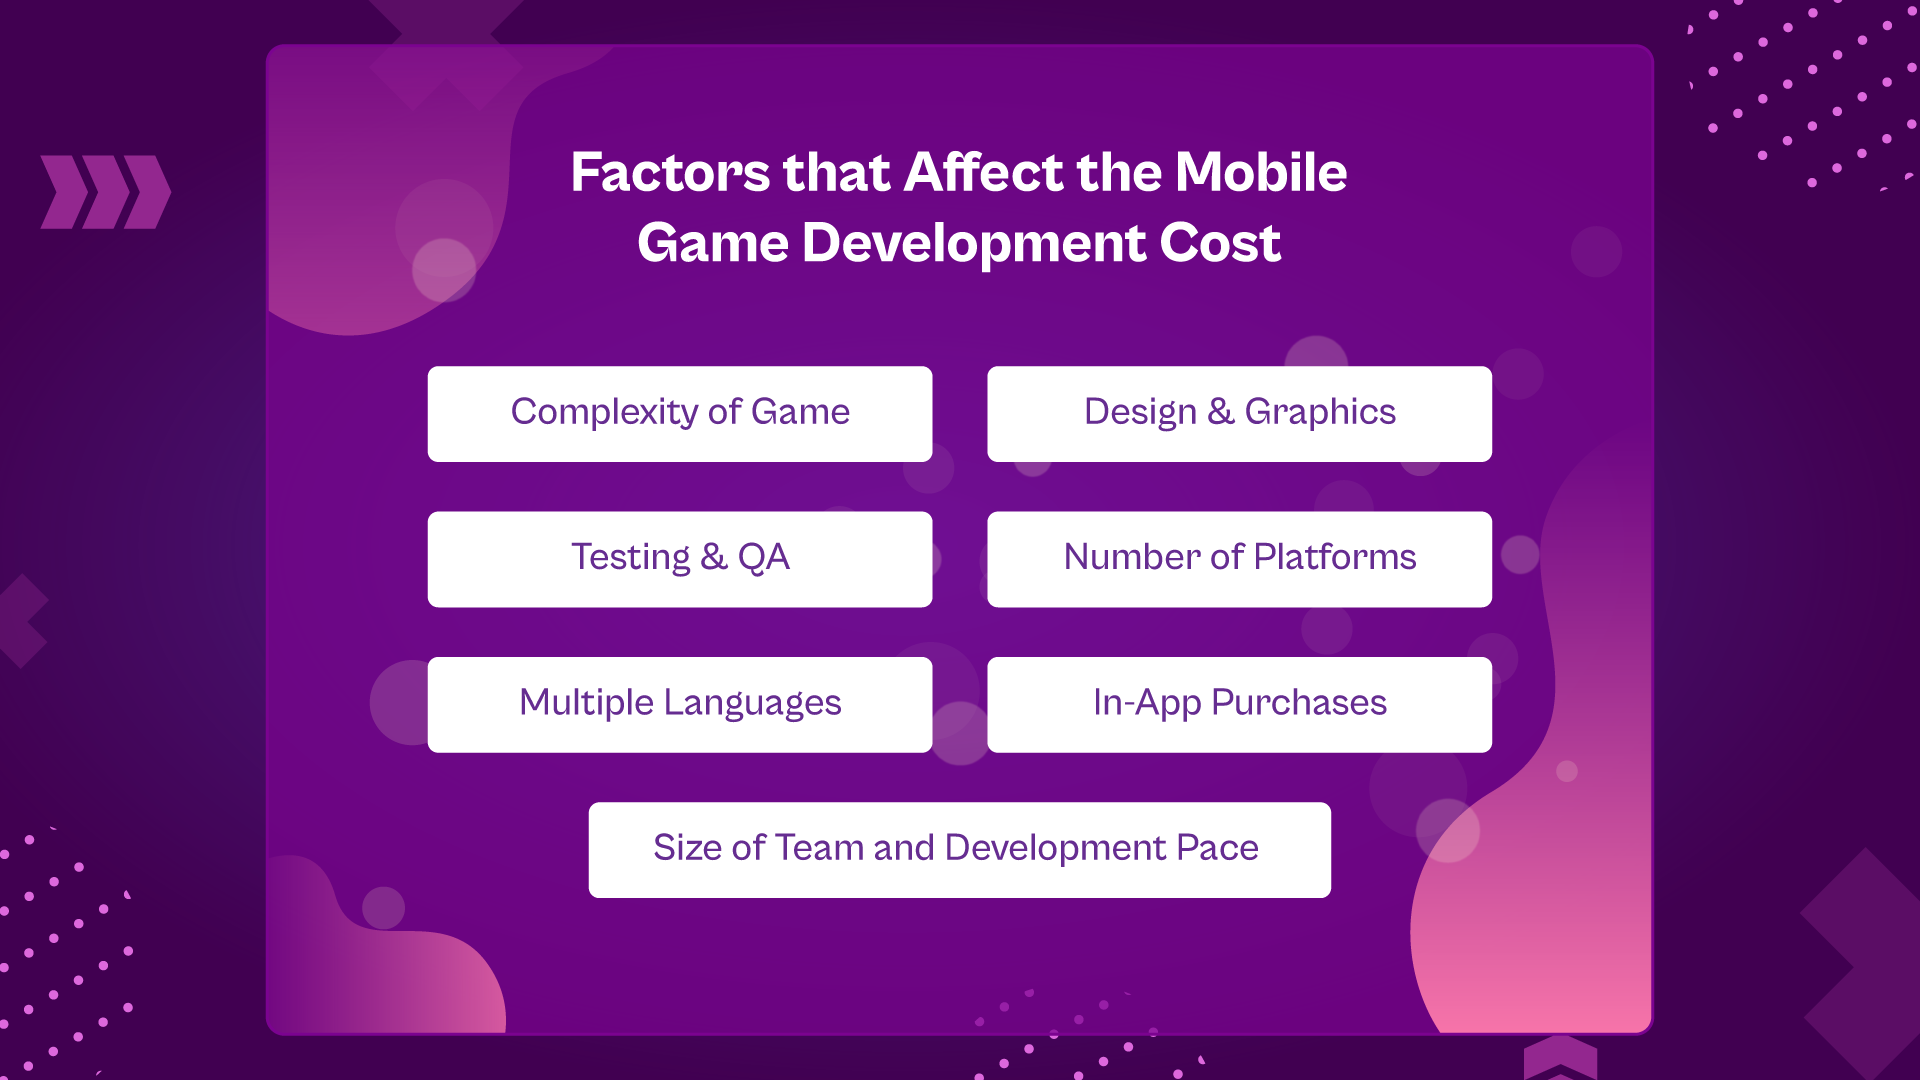 <img src="Factors-that-Affect-the-Mobile-Game-Development-Cost.png" alt="Factors that Affect the Mobile Game Development Cost">